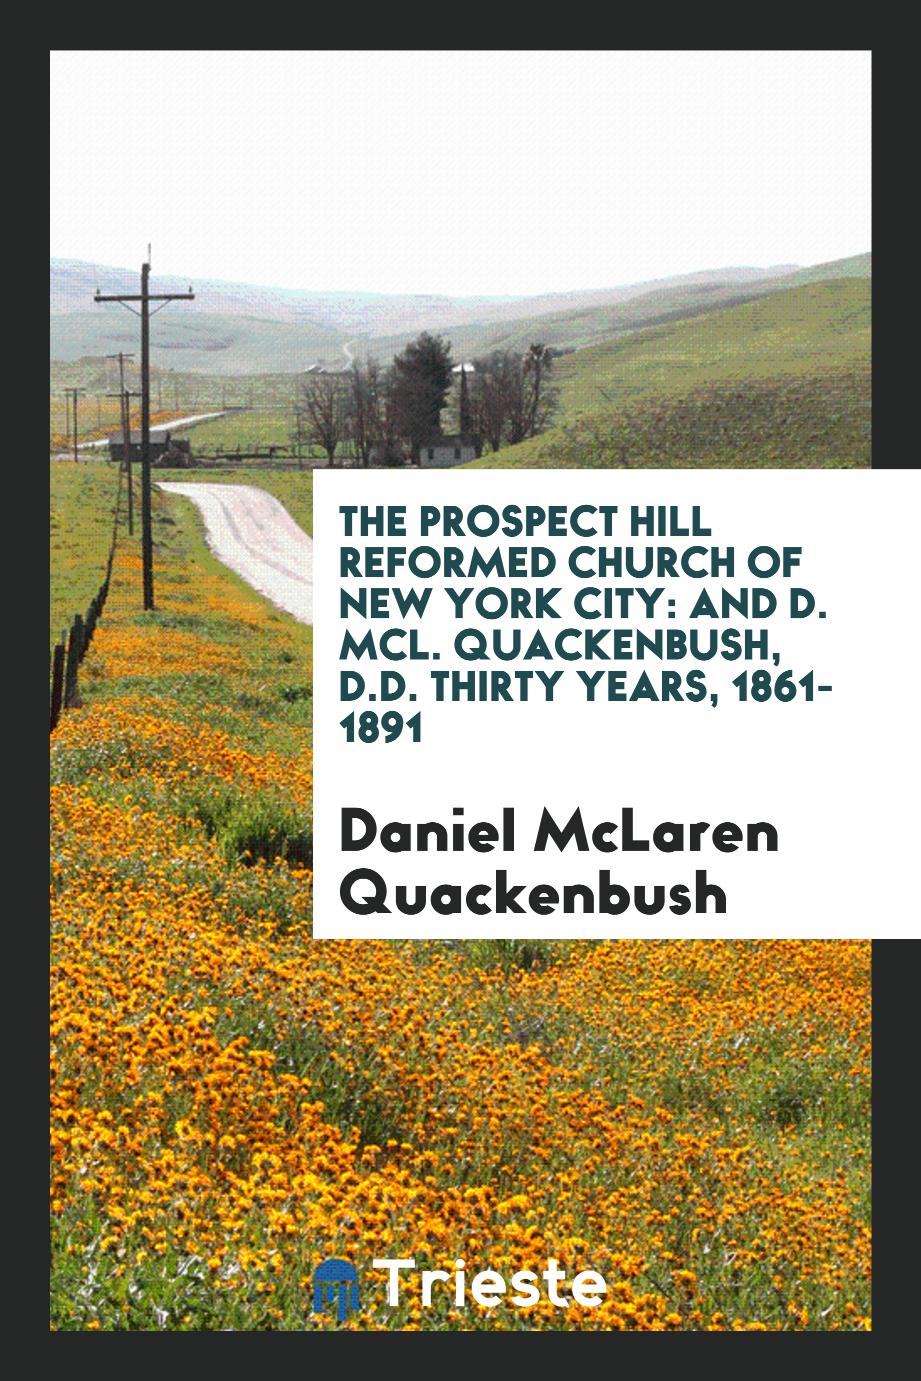 The Prospect Hill Reformed Church of New York City: And D. McL. Quackenbush, D.D. Thirty Years, 1861-1891